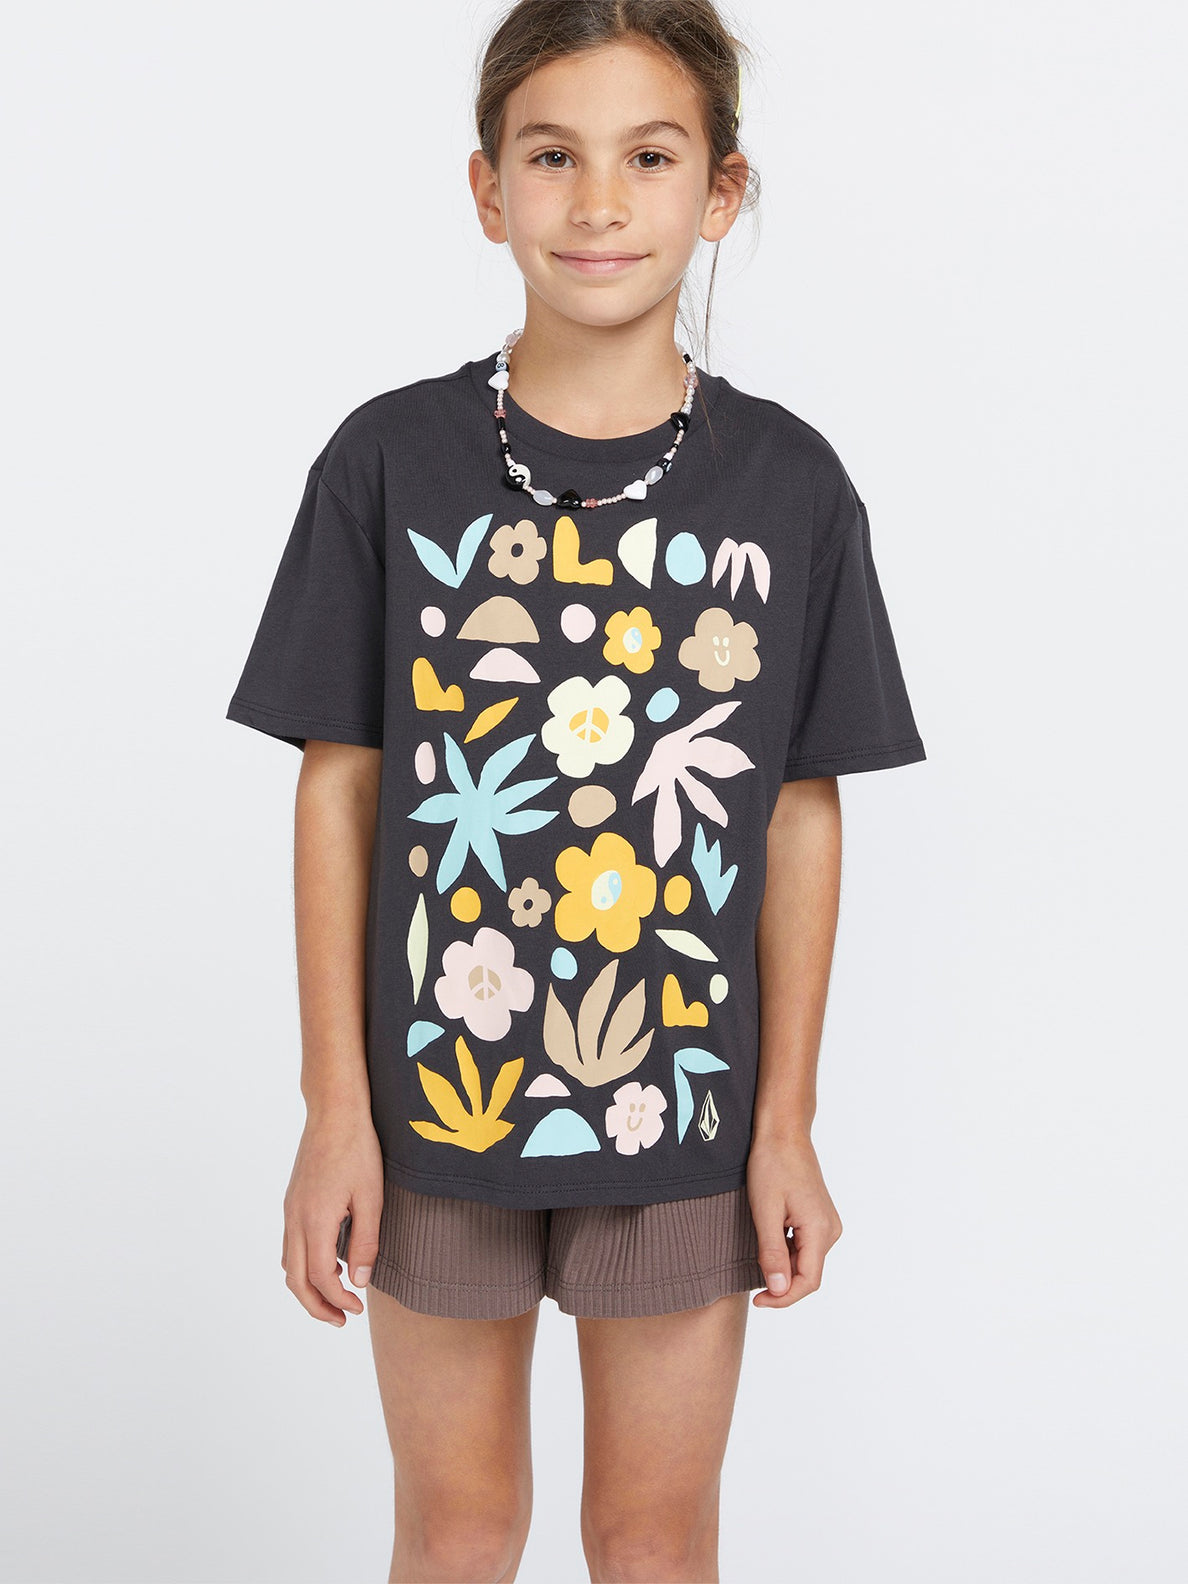 Girls Truly Stoked Bf Tee - Vintage Black